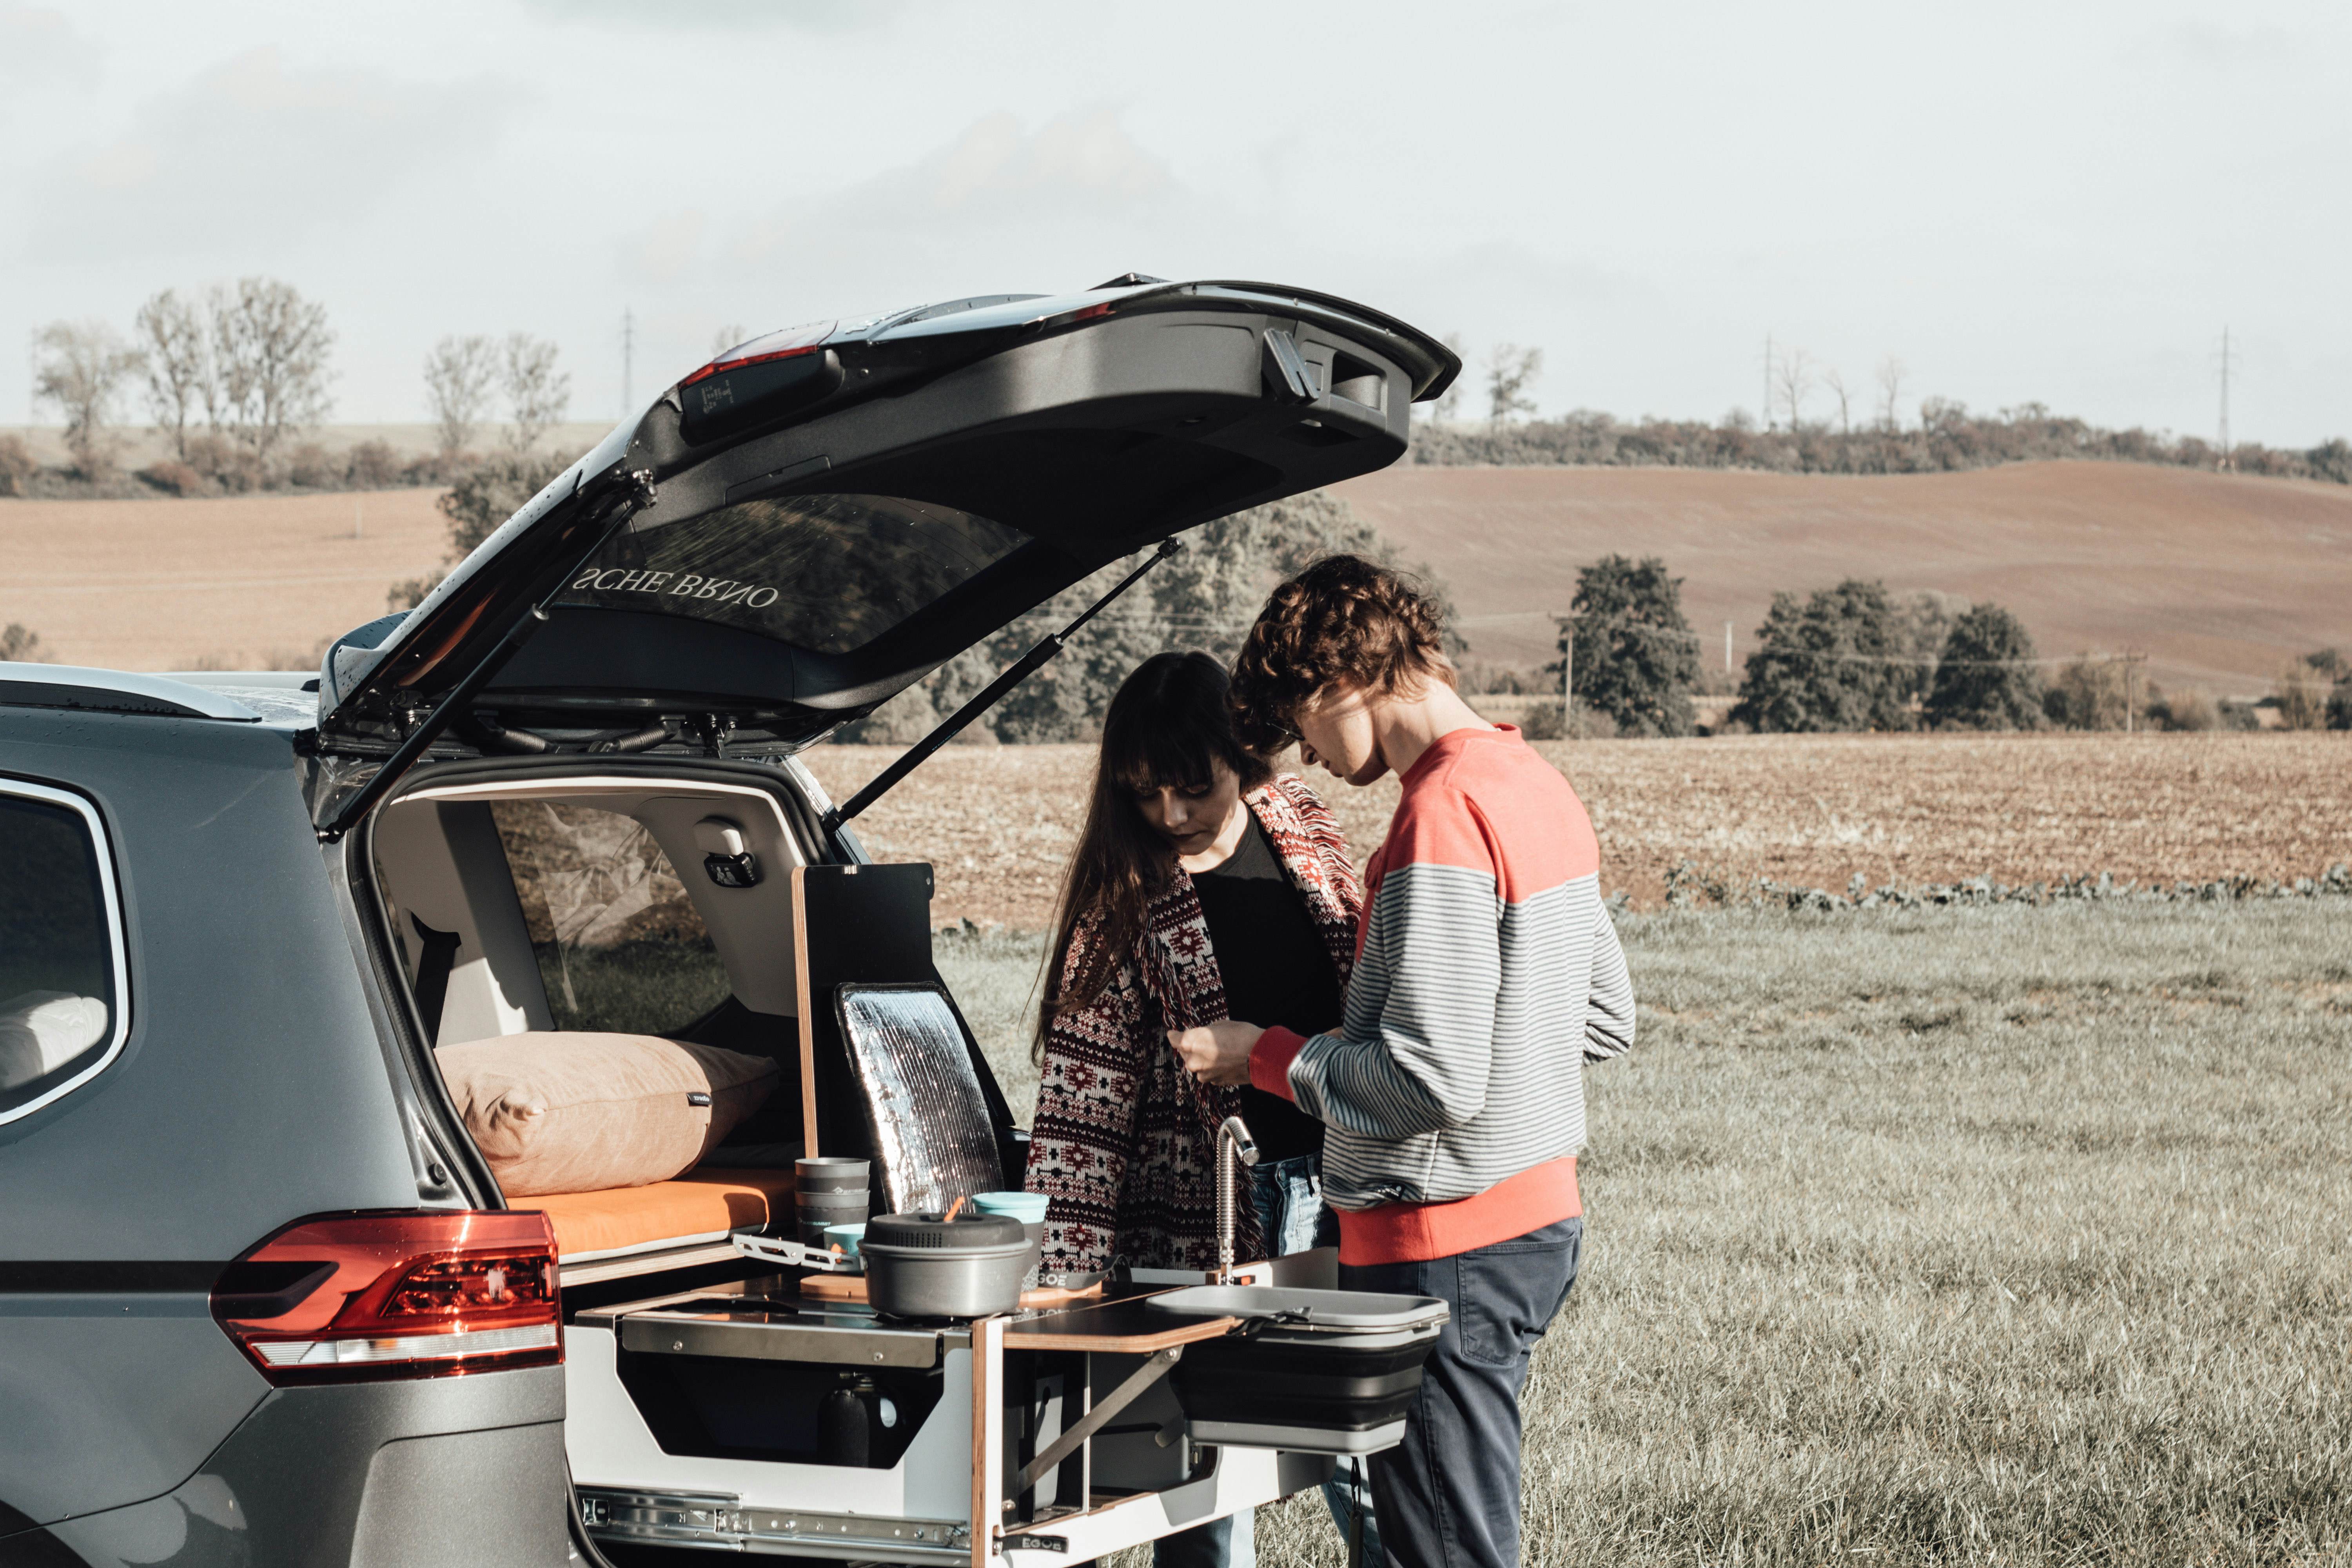 Turn your car into a camper with this portable unit - Lonely Planet